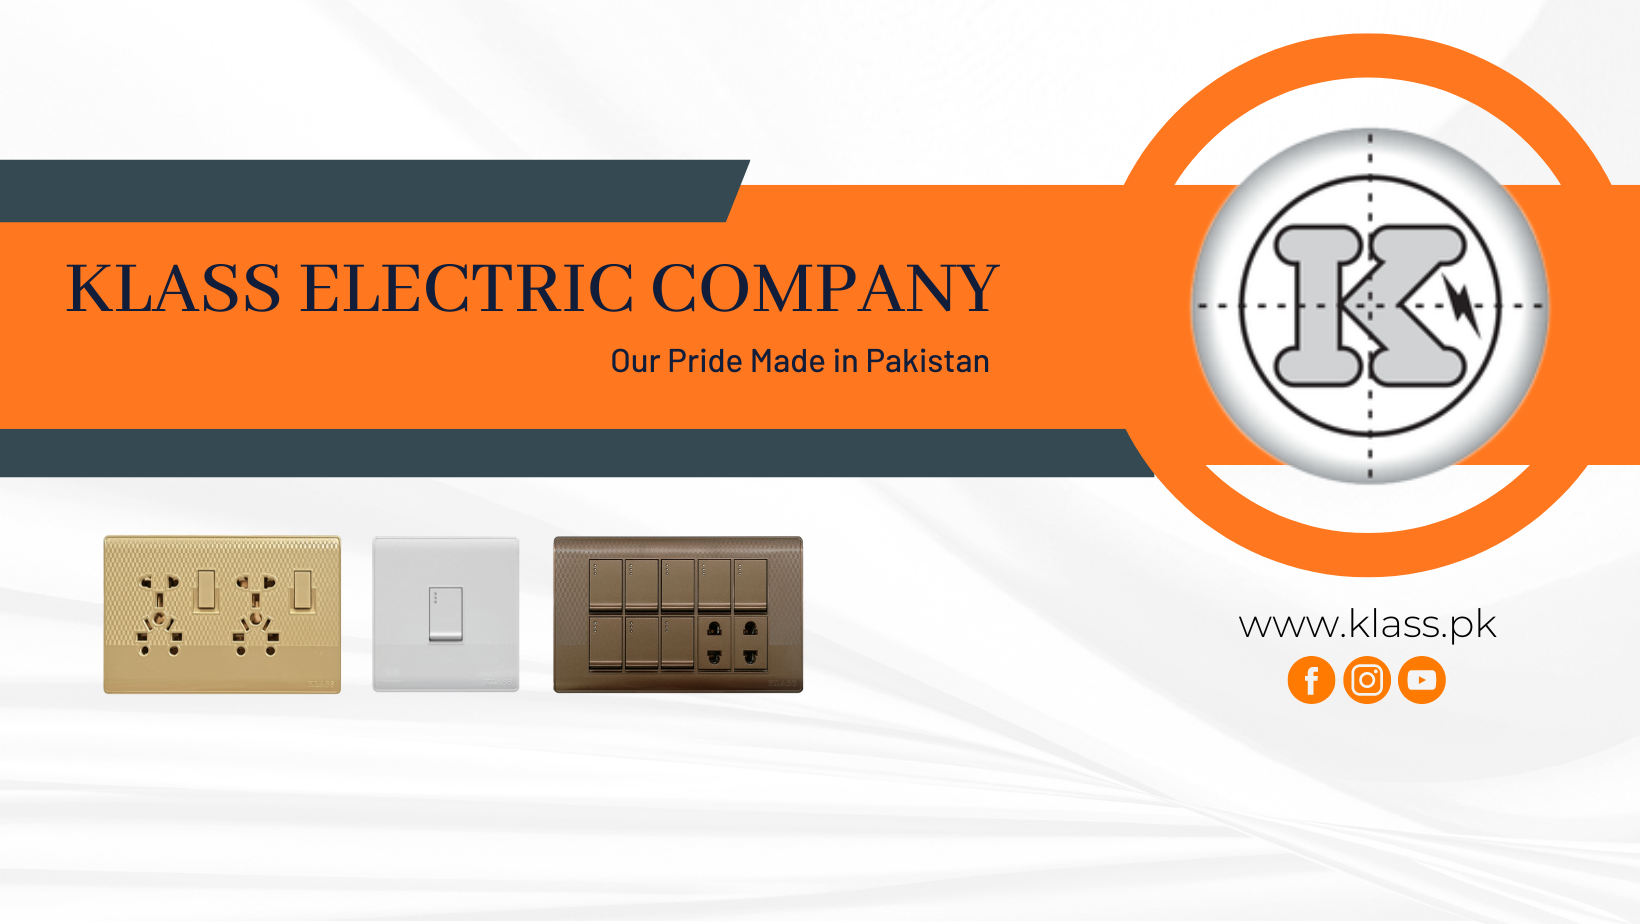 KLASS Electric Company: Manufacturer of Electrical Goods